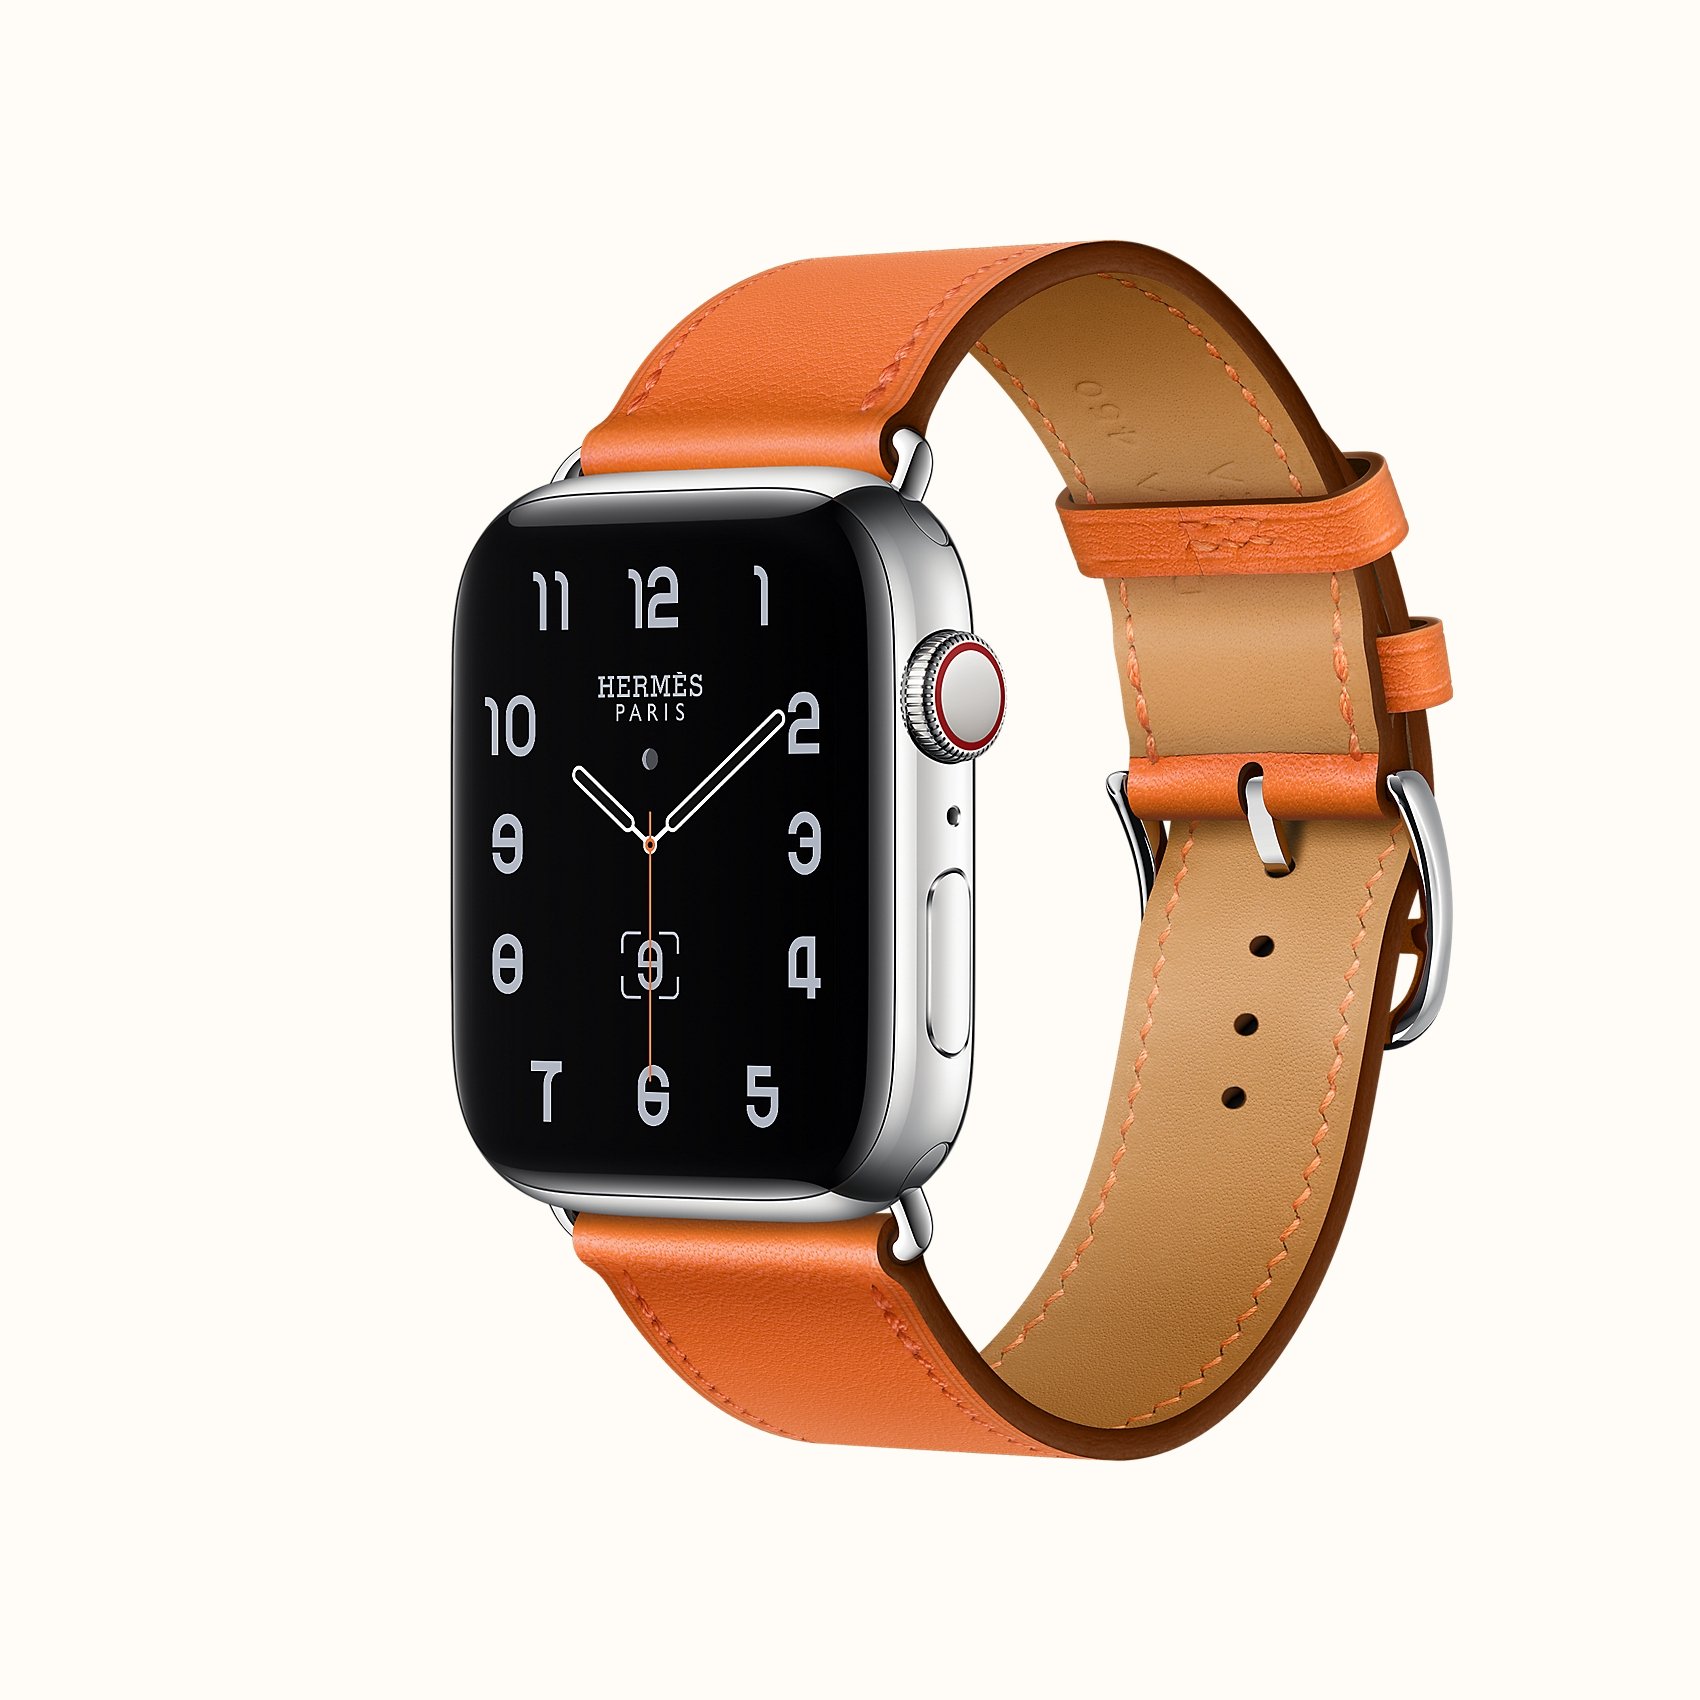 Series 6 case & Band Apple Watch Hermes Single Tour 44 mm - The 